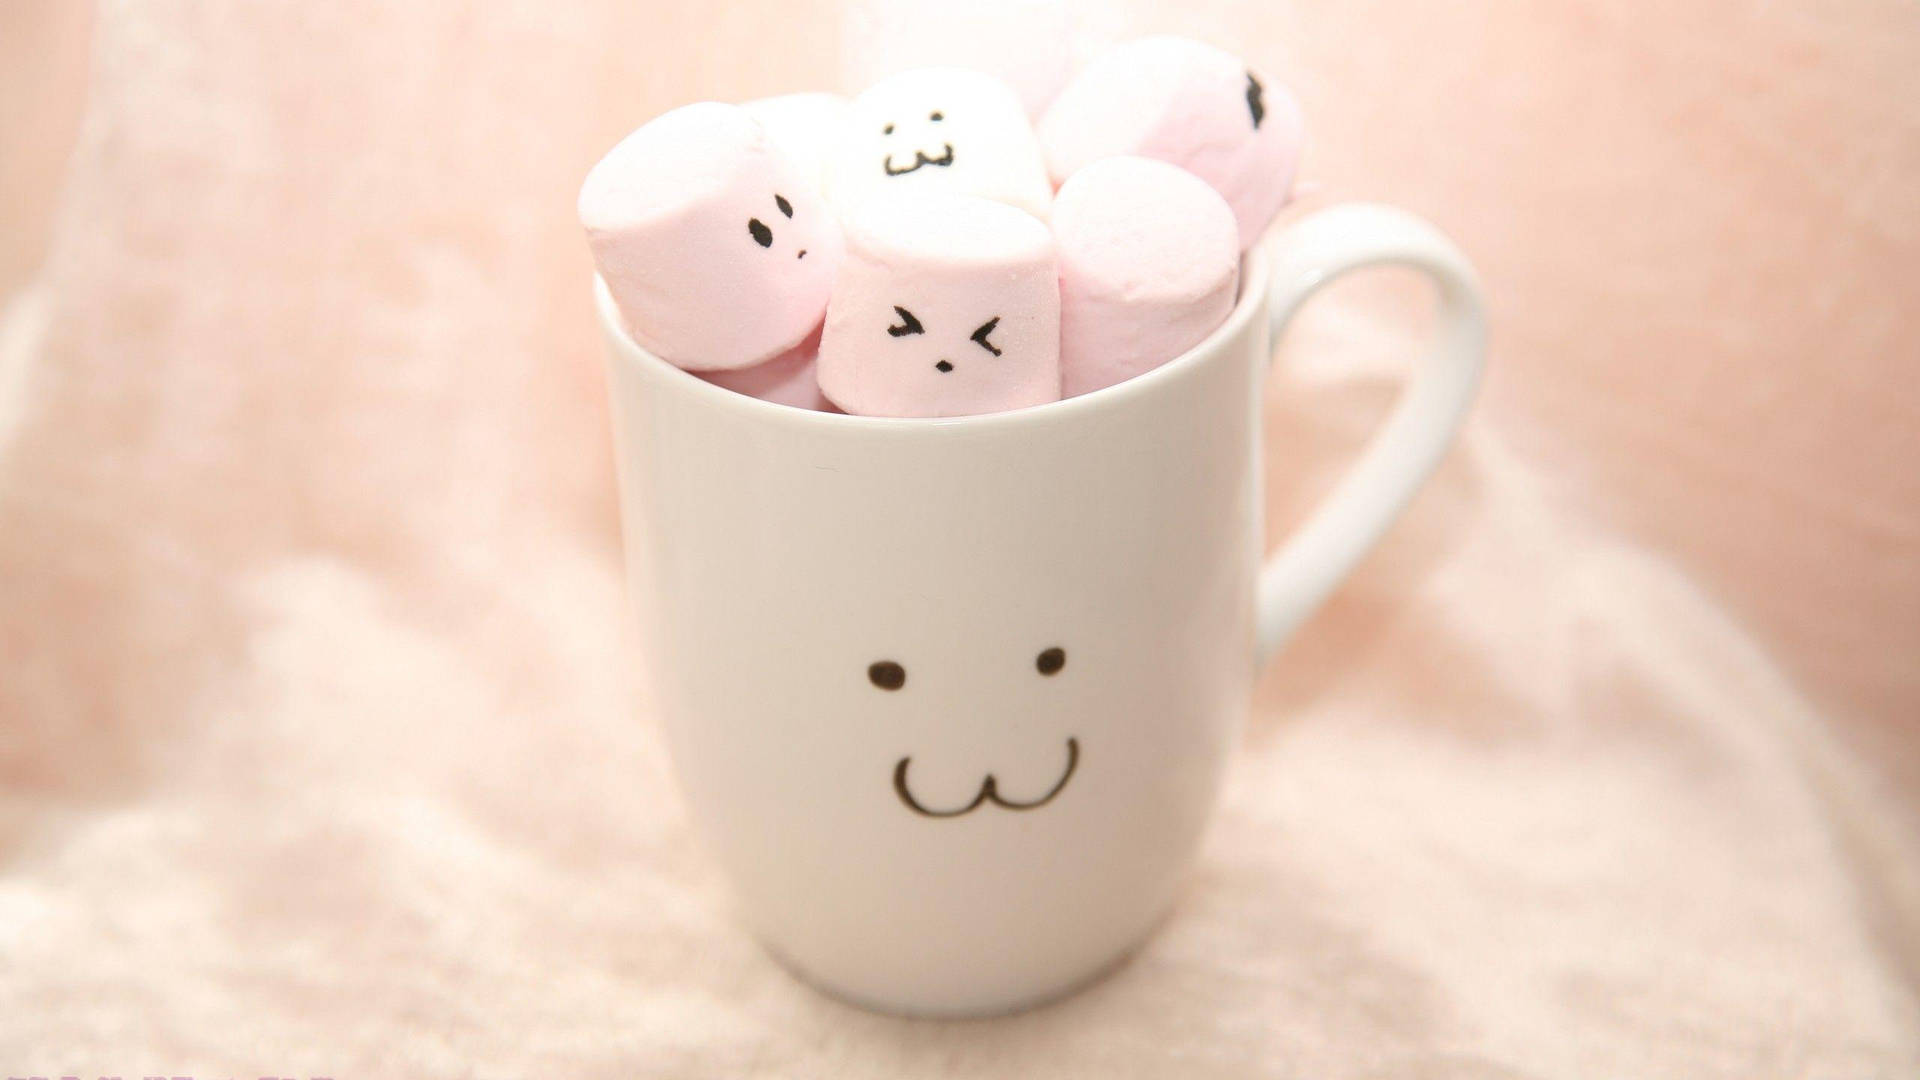 Delectable Display of 3D Marshmallow in a White Mug Wallpaper